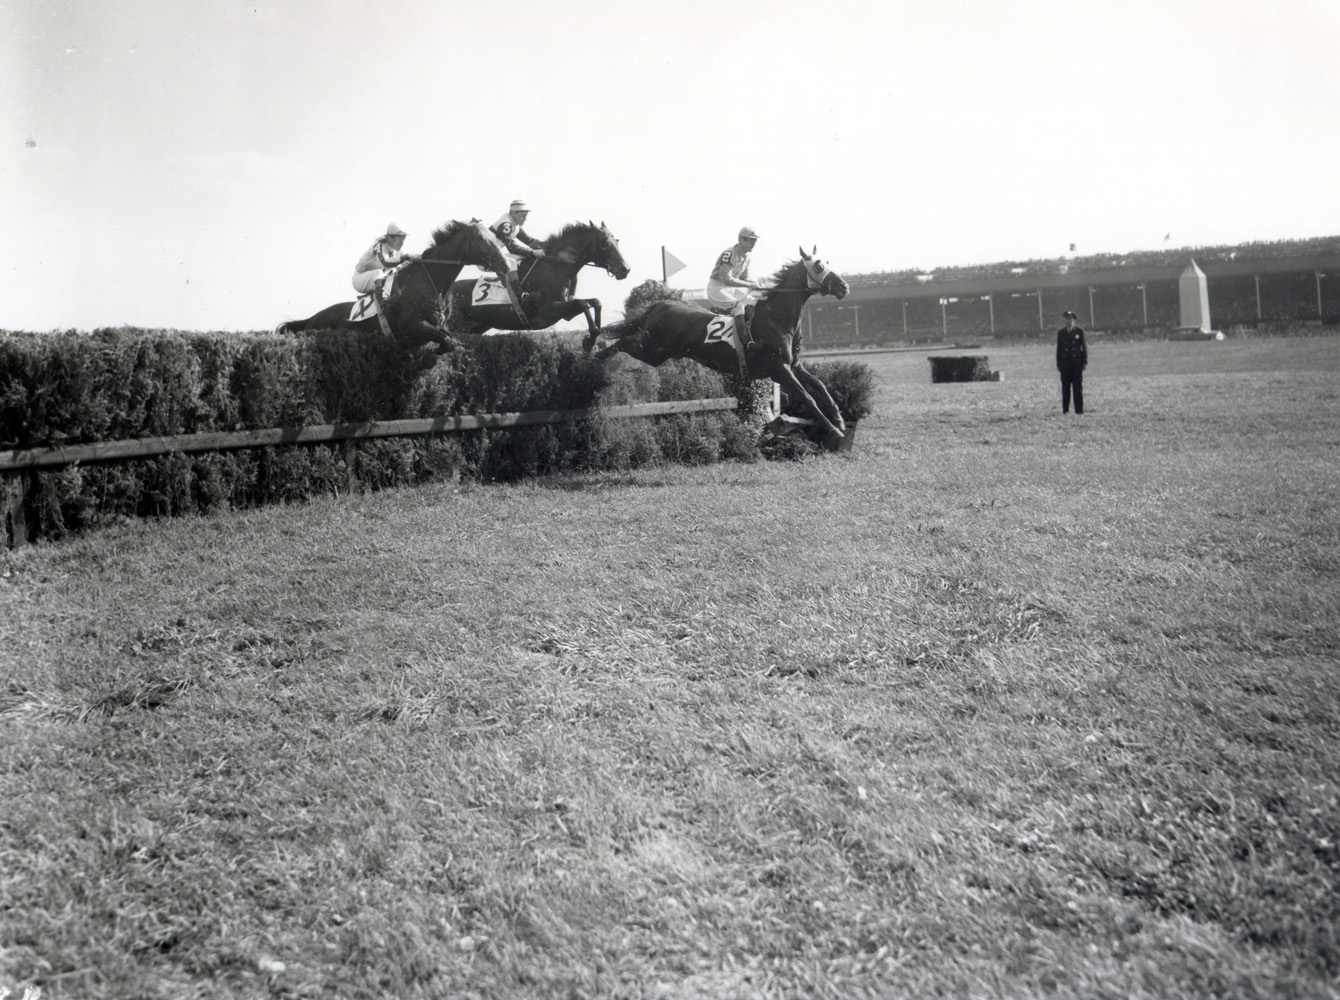 Neji (Frank Dooley Adams up) clearing a jump in the Broad Hollow Steeplechase at Belmont Park (Keeneland Library Morgan Collection/Museum Collection)